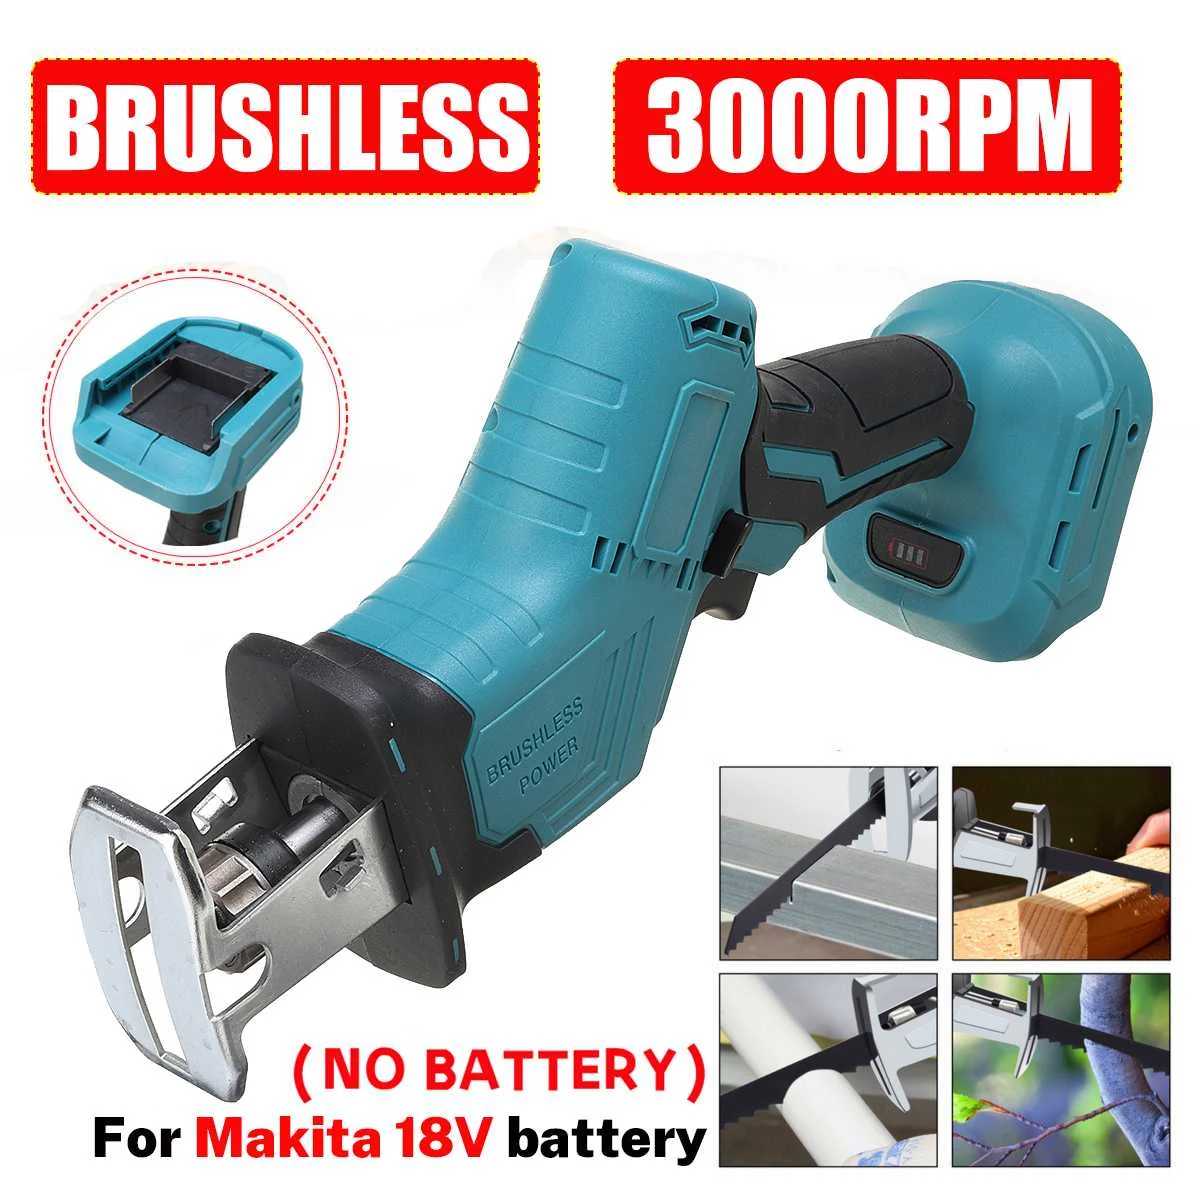 

Drillpro 3000rpm Brushless Cordless Reciprocating Saw Electric Saw Wood Metal Cutting Machine Power Tool for Makita 18V Battery